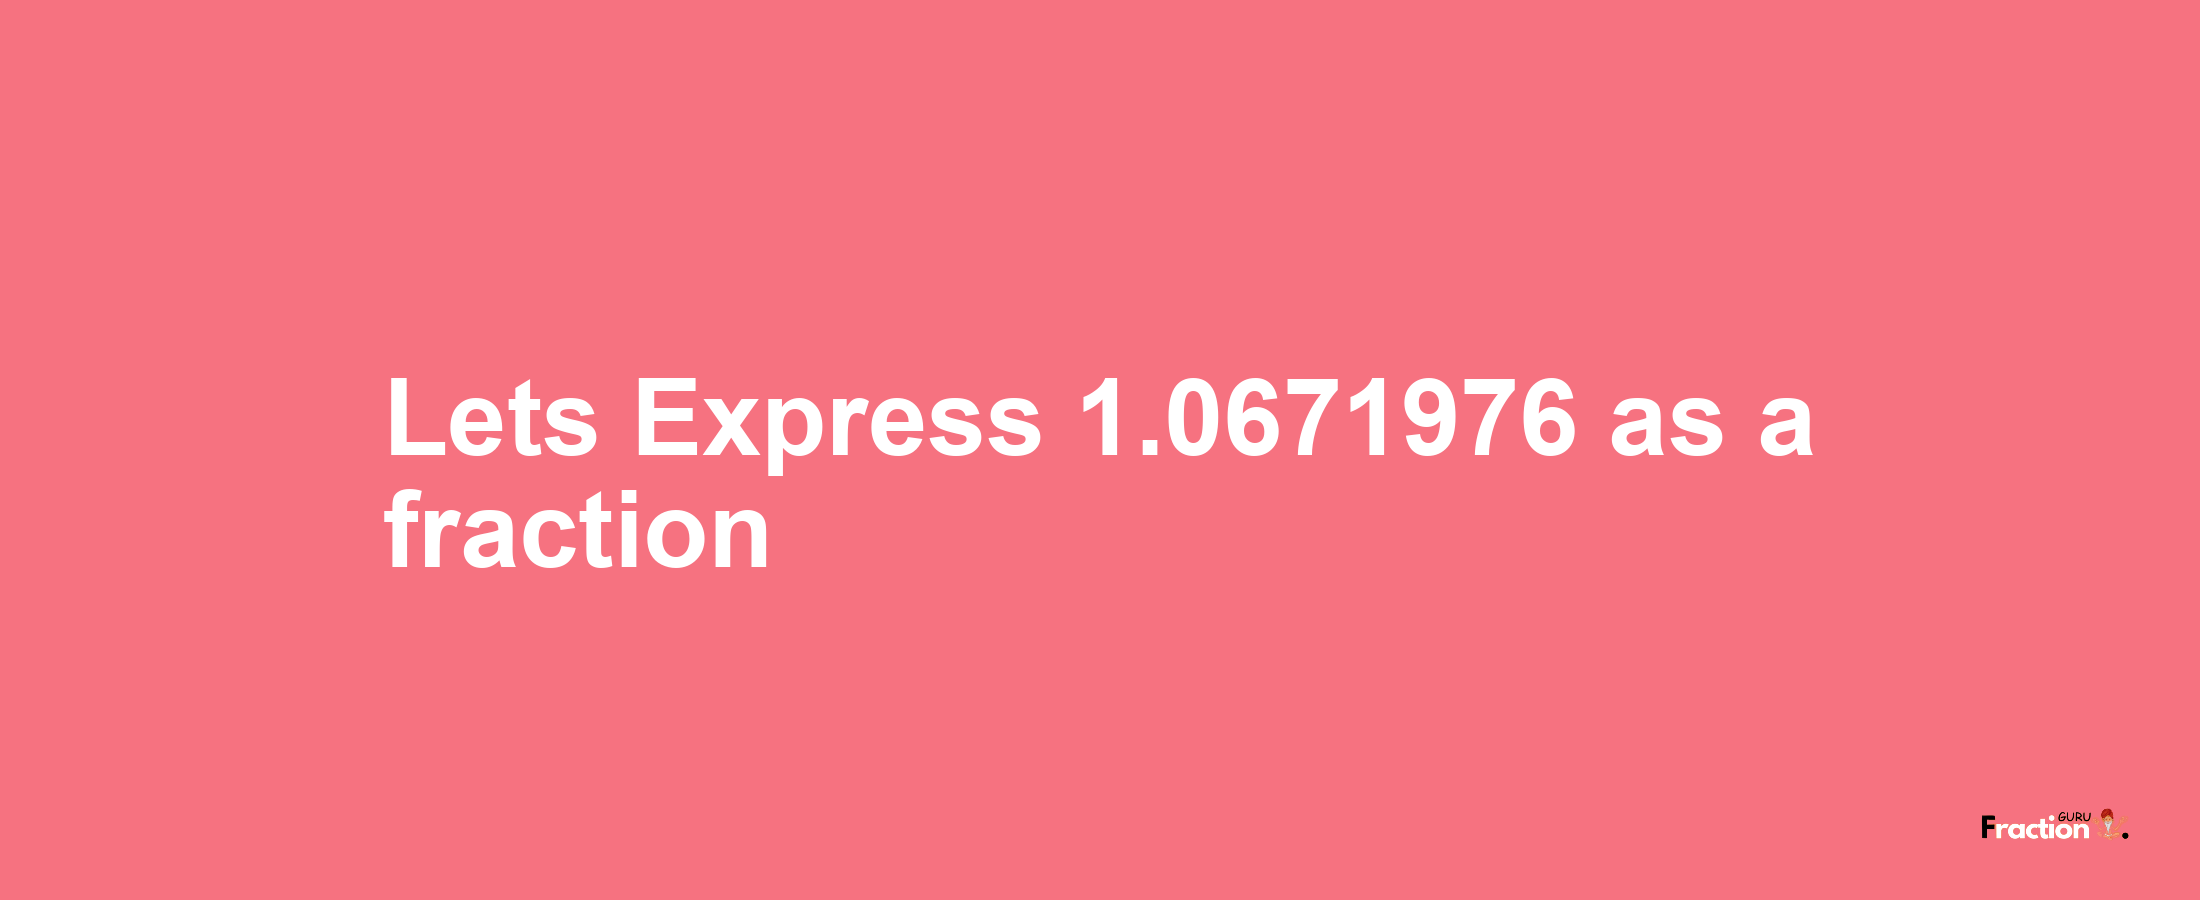 Lets Express 1.0671976 as afraction